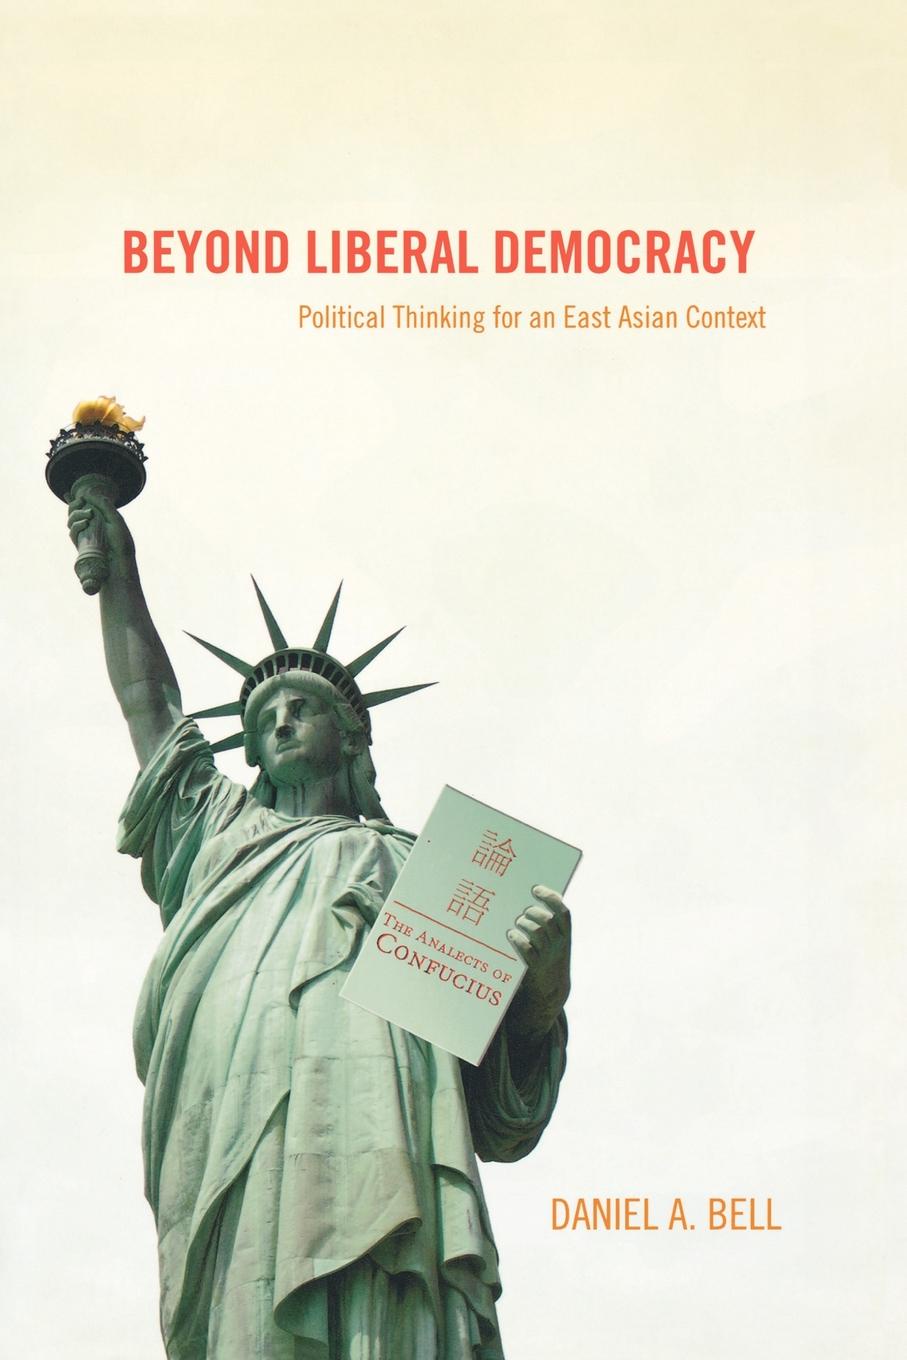 Beyond Liberal Democracy. Political Thinking for an East Asian Context